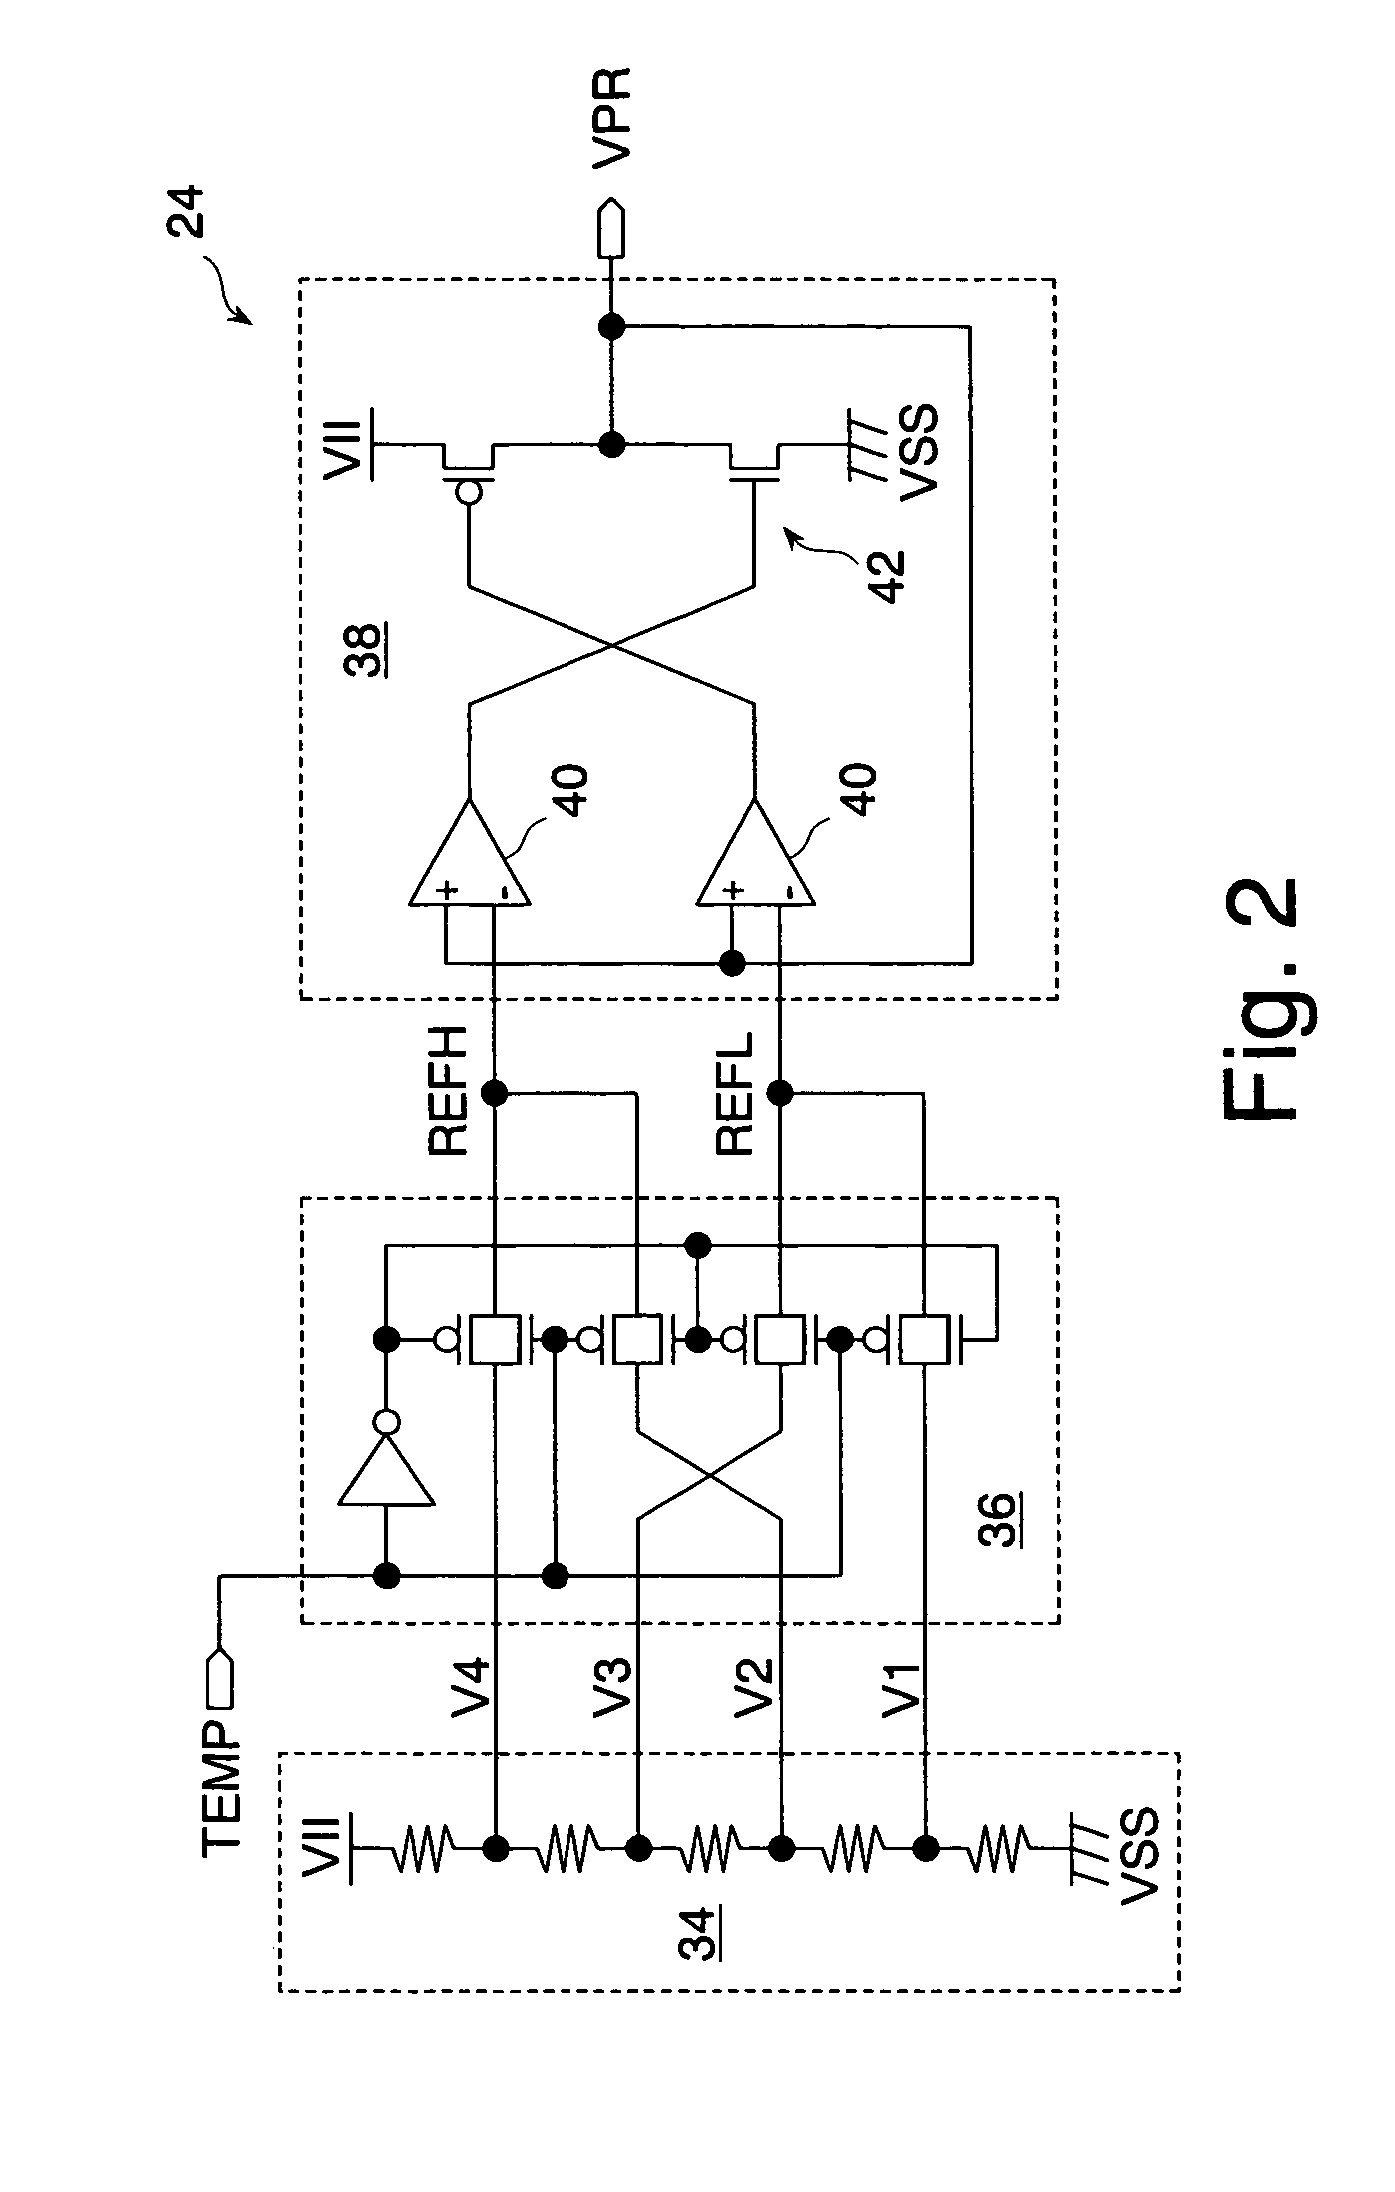 Semiconductor memory having a precharge voltage generation circuit for reducing power consumption